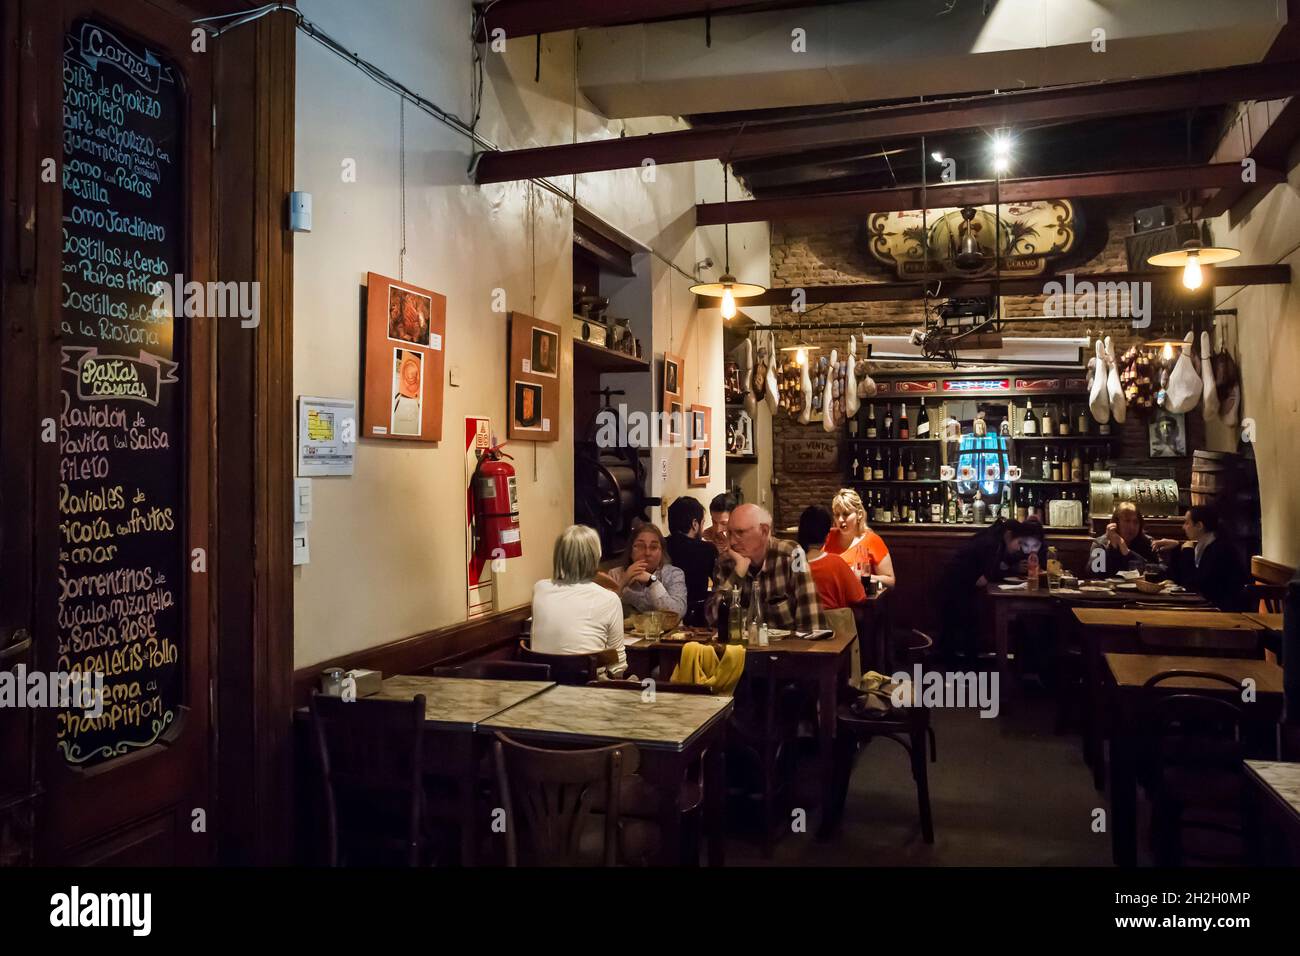 Horizontal view of one of the dining areas of El Federal bar in Carlos Calvo St, San Telmo neighborhood, Buenos Aires, Argentina Stock Photo